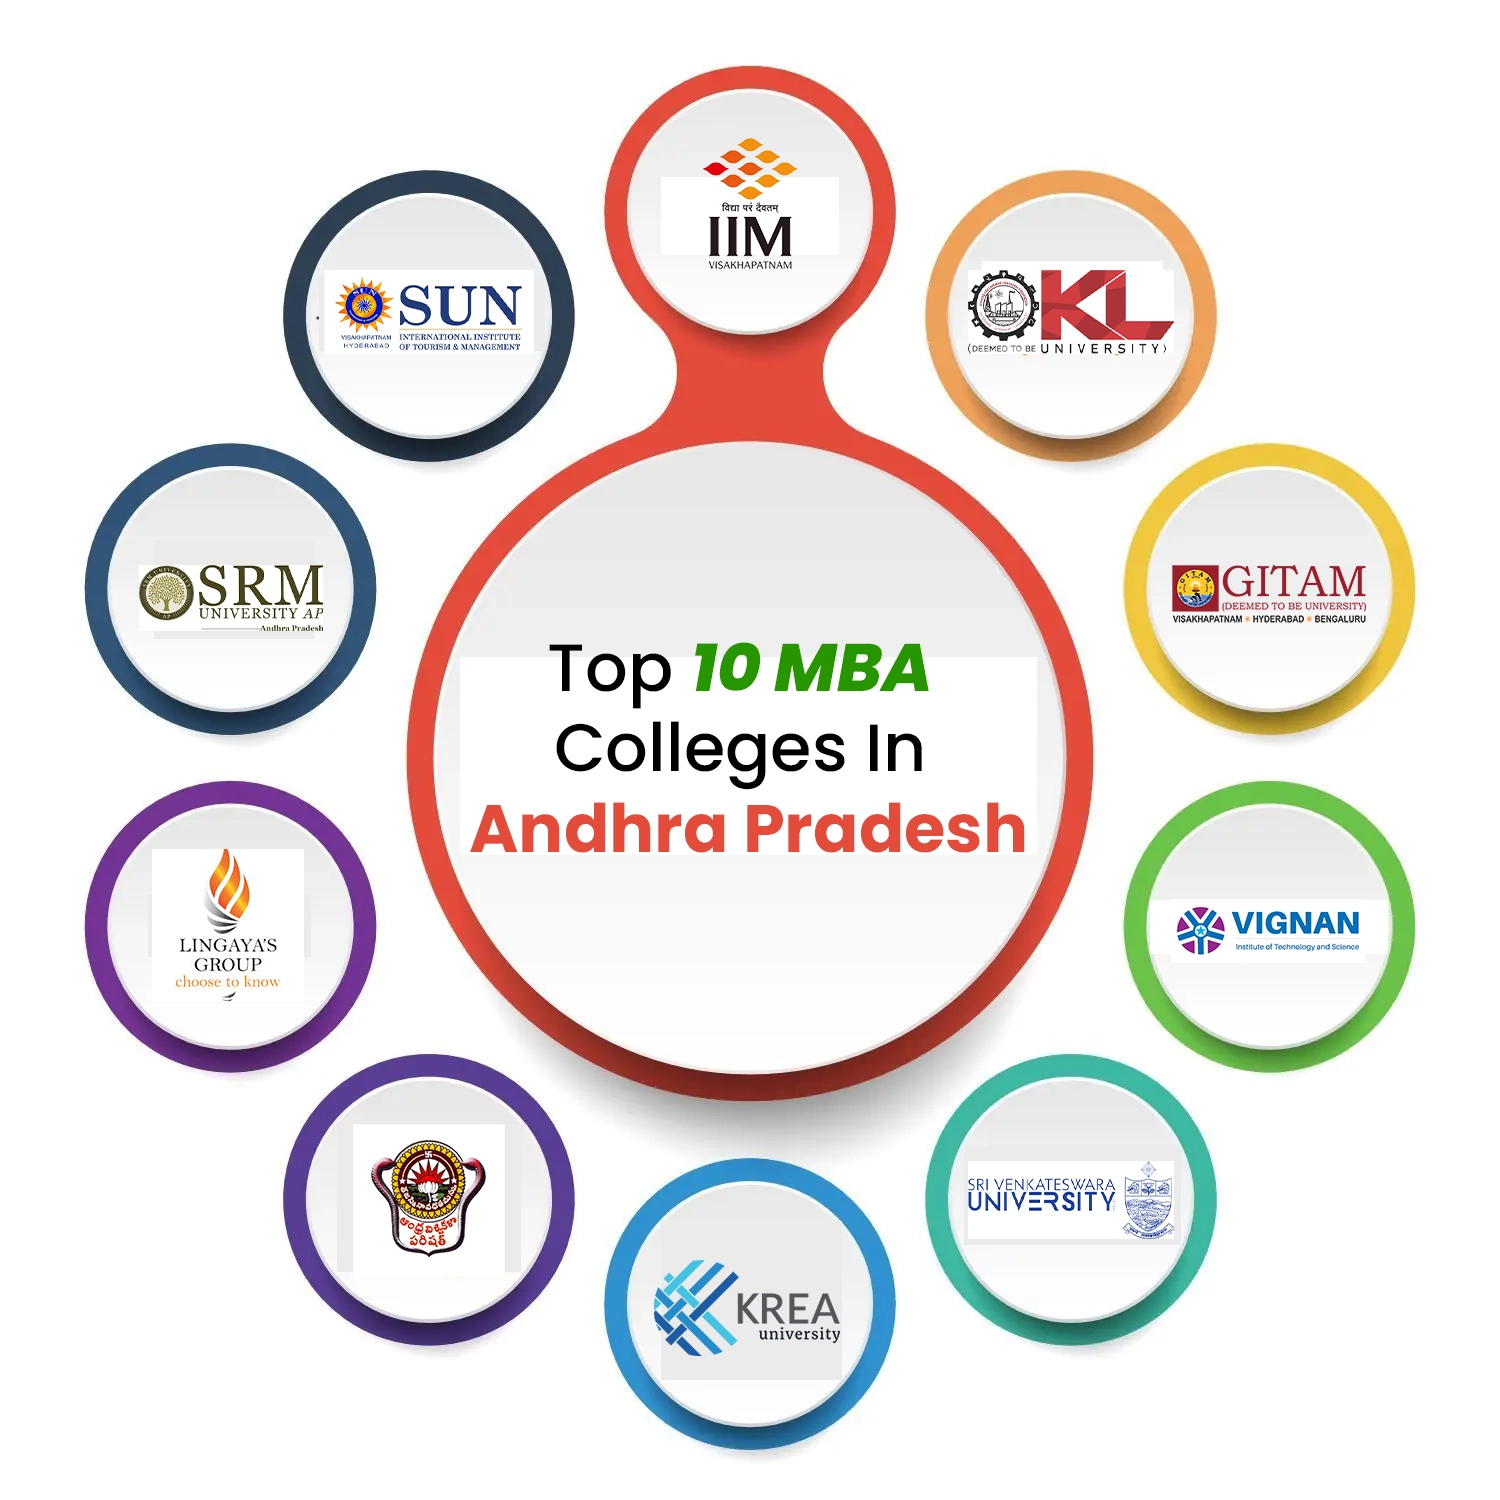 Top 10 MBA Colleges In Andhra Pradesh